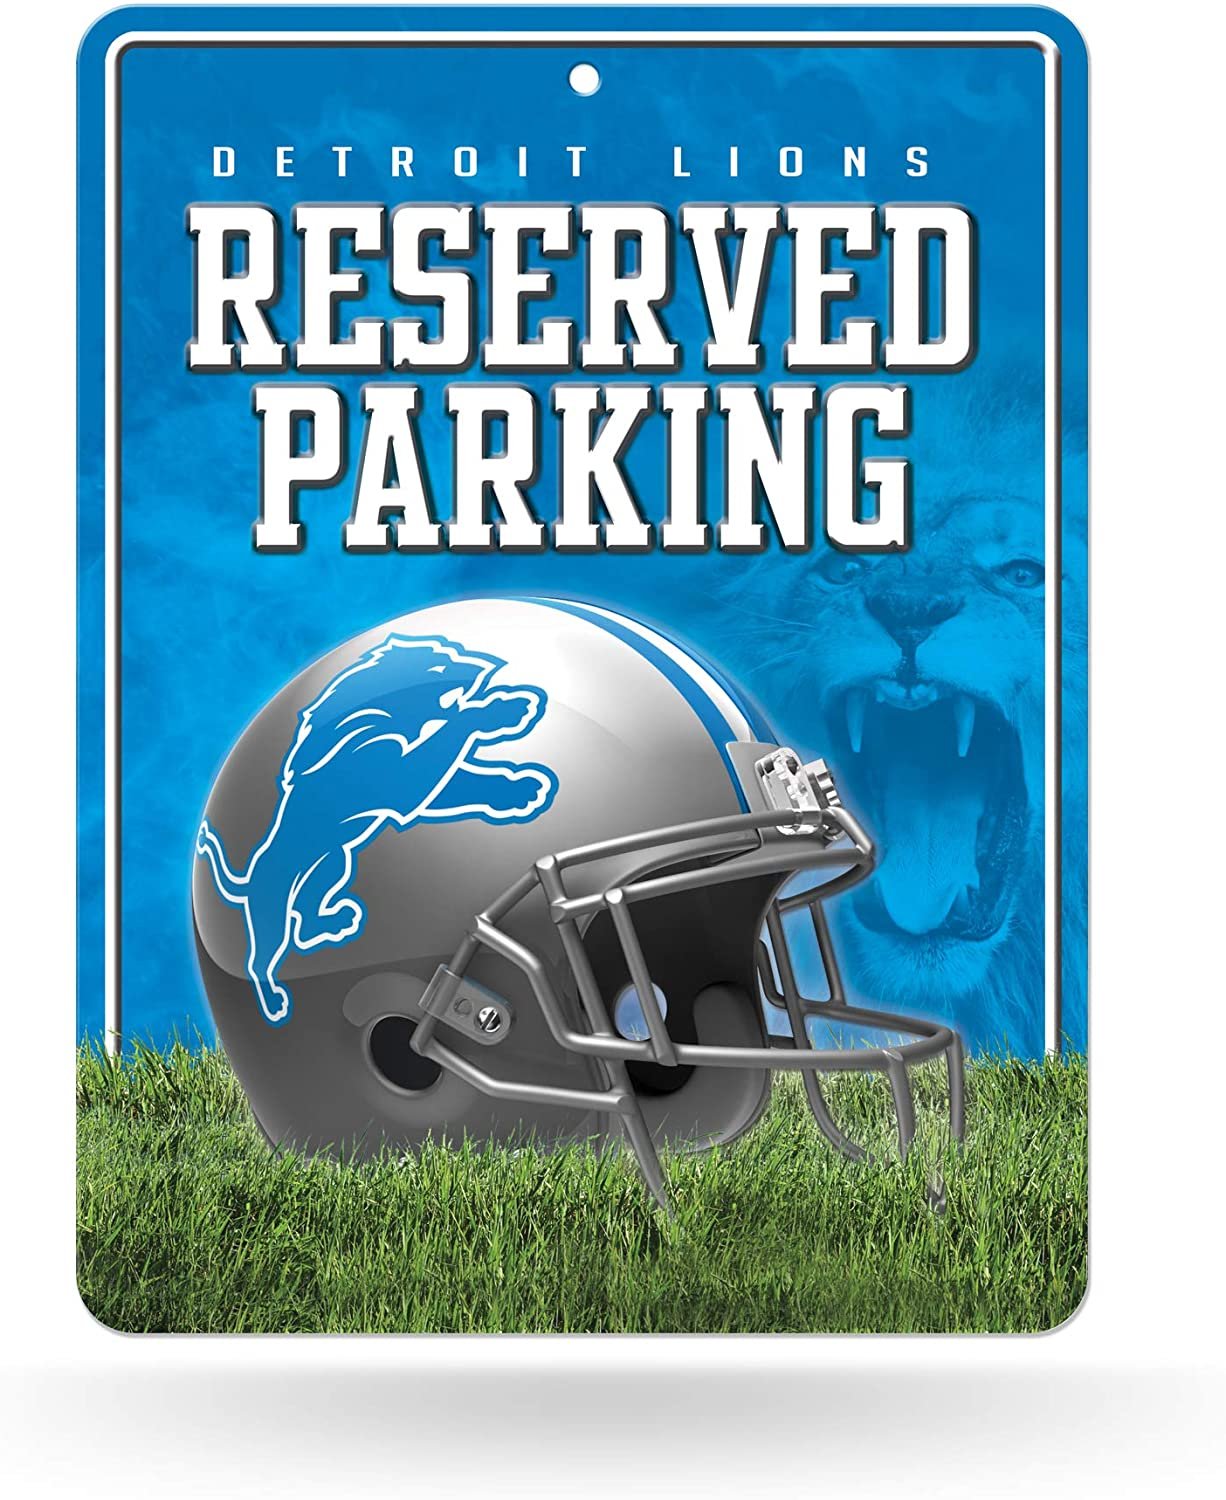 Detroit Lions Metal Parking Novelty Wall Sign 8.5 x 11 Inch